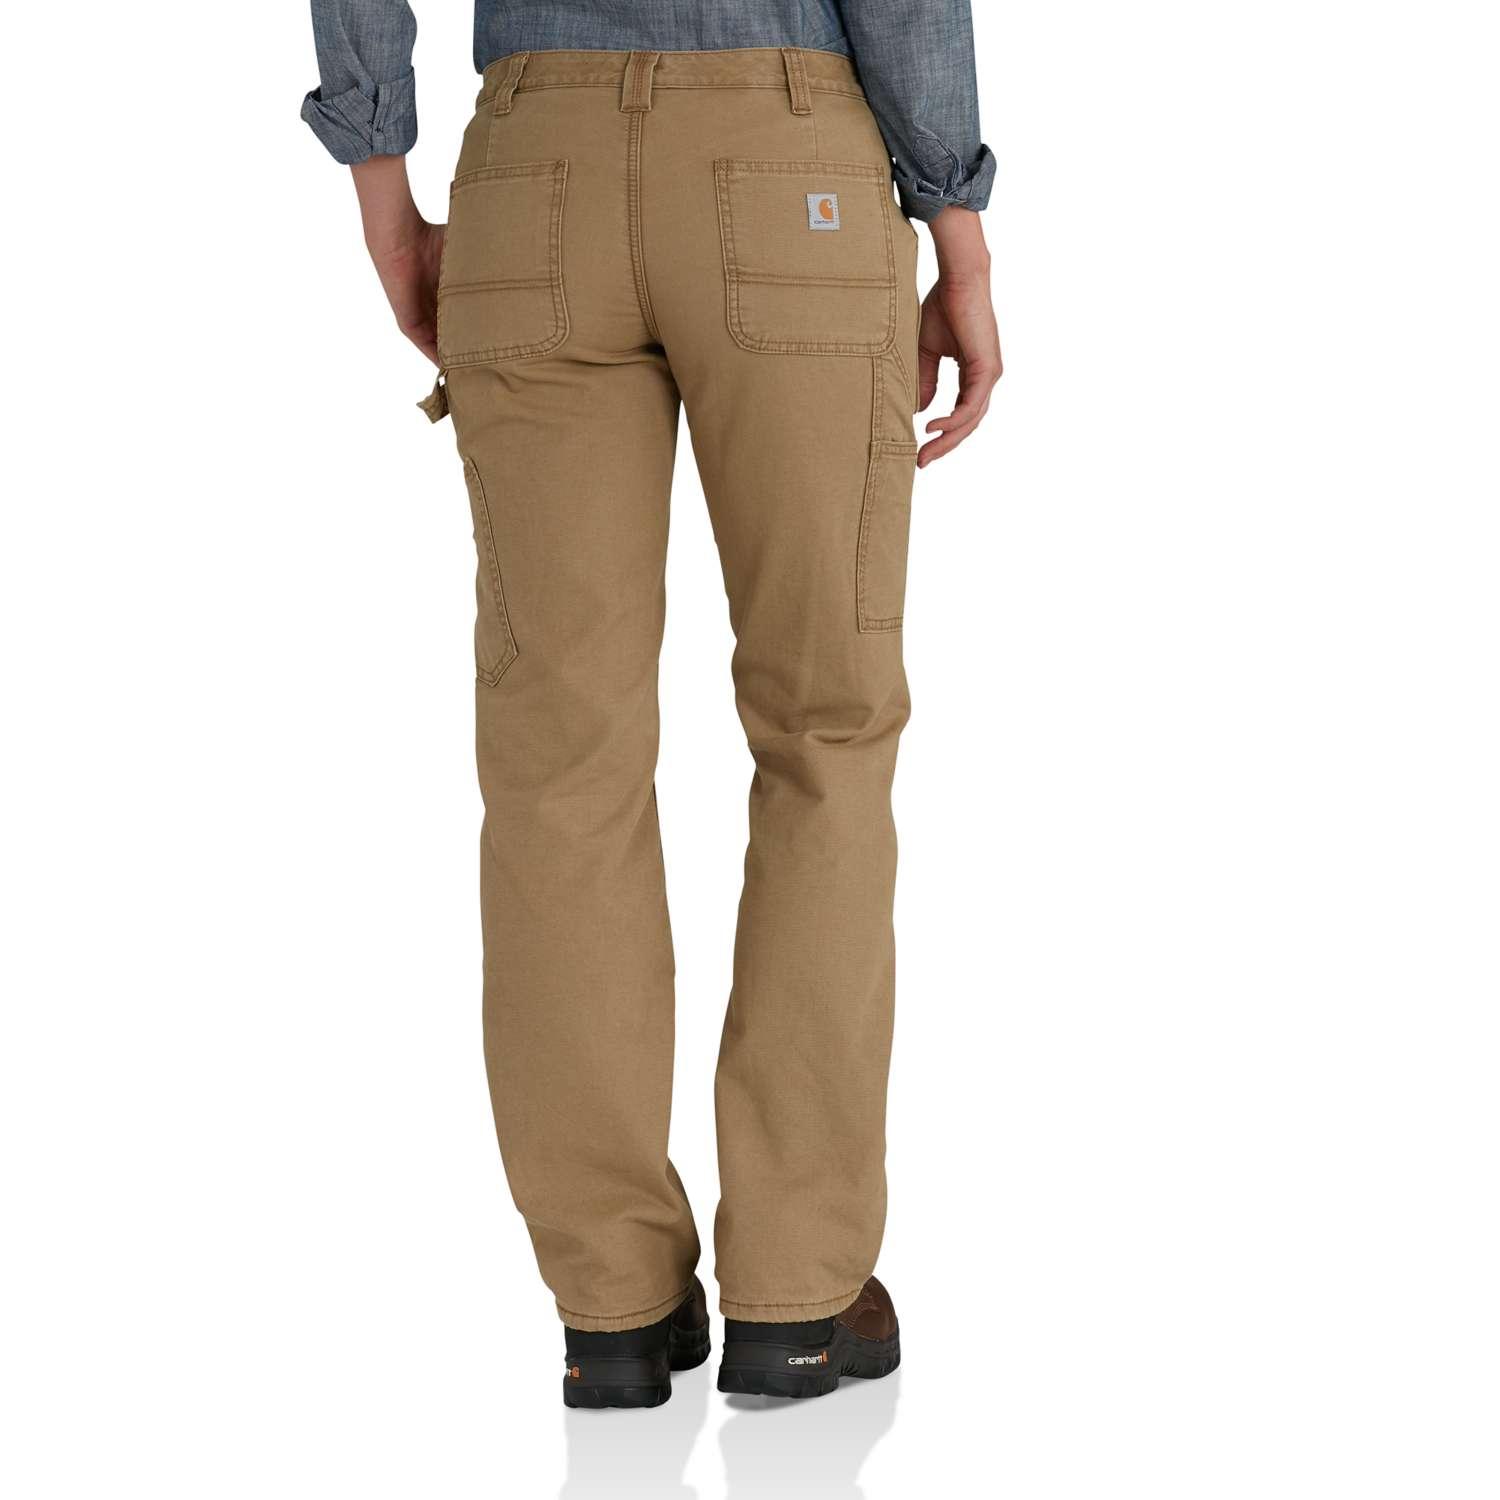 Carhartt Pants for Women, Online Sale up to 50% off